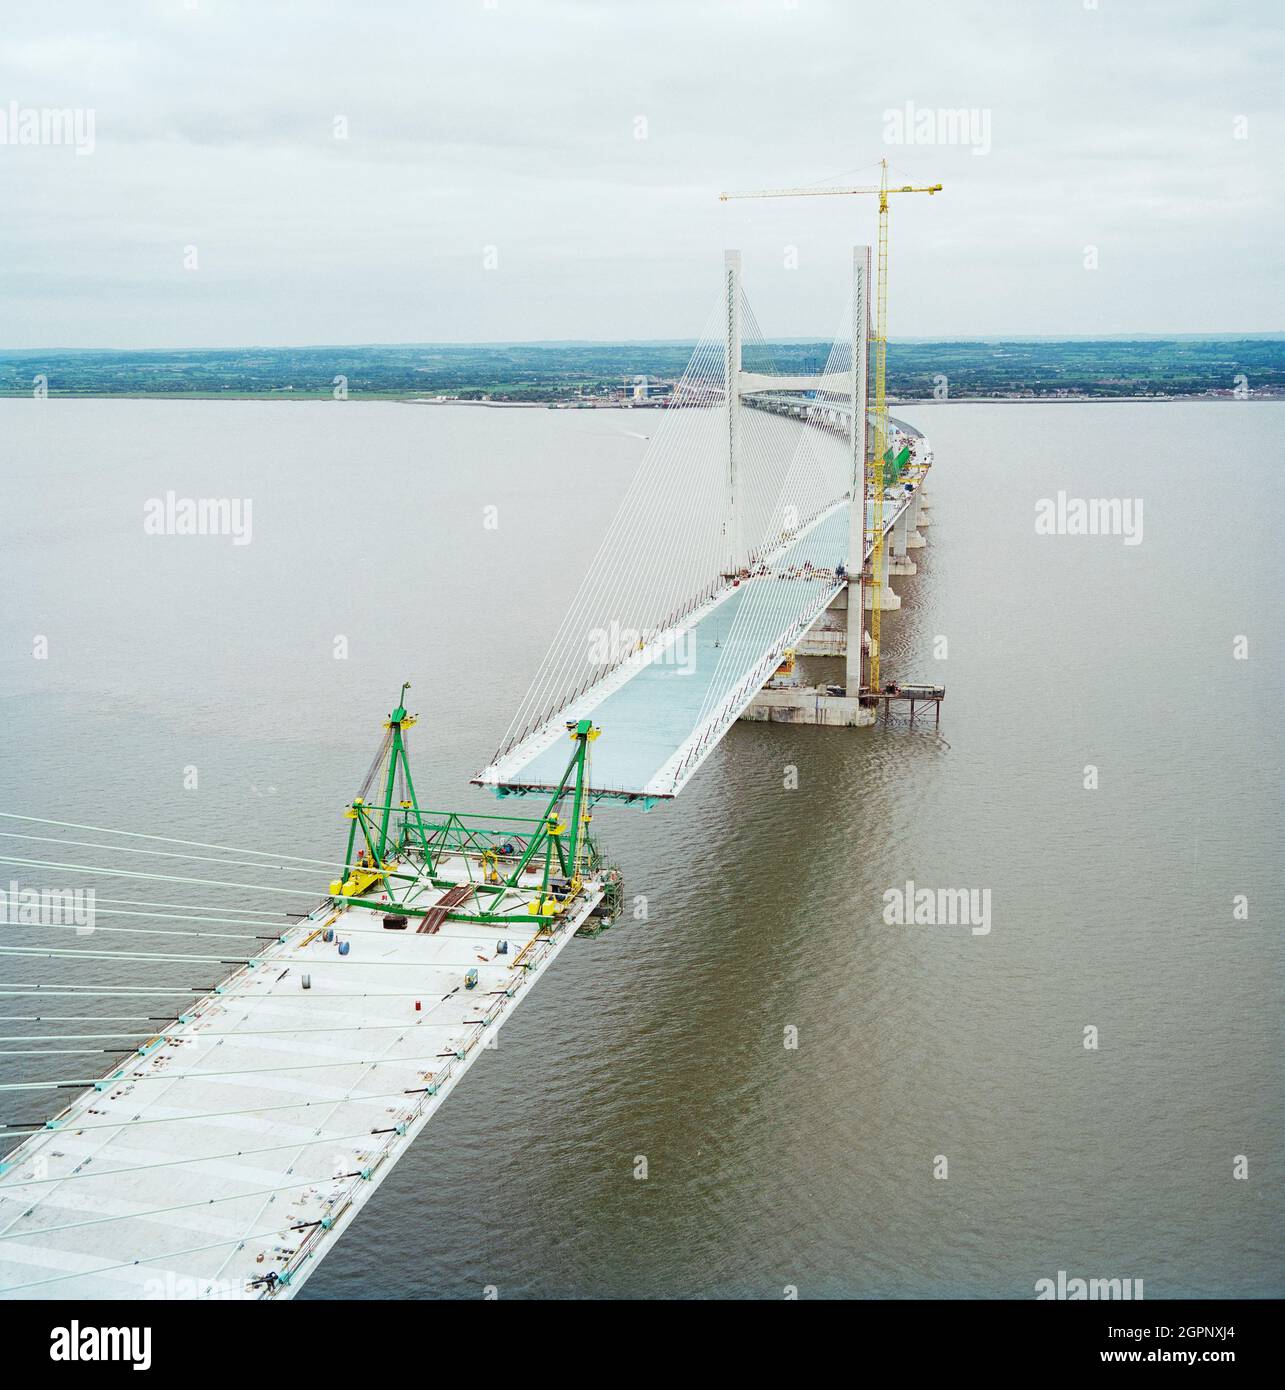 A view looking east from near the top of the Second Severn Crossing during its construction, showing cables supporting the deck of the bridge and work being carried out to join the deck units. The Second Severn Crossing took four years to build and was a joint civil engineering project between Laing Civil Engineering and the French company GTM. The work started in April 1992 and the opening ceremony later took place on 5th June 1996. The crossing is a cable-stayed bridge which stretches over 5000 metres across the River Severn connecting England and Wales, 3 miles downstream from the Severn Br Stock Photo